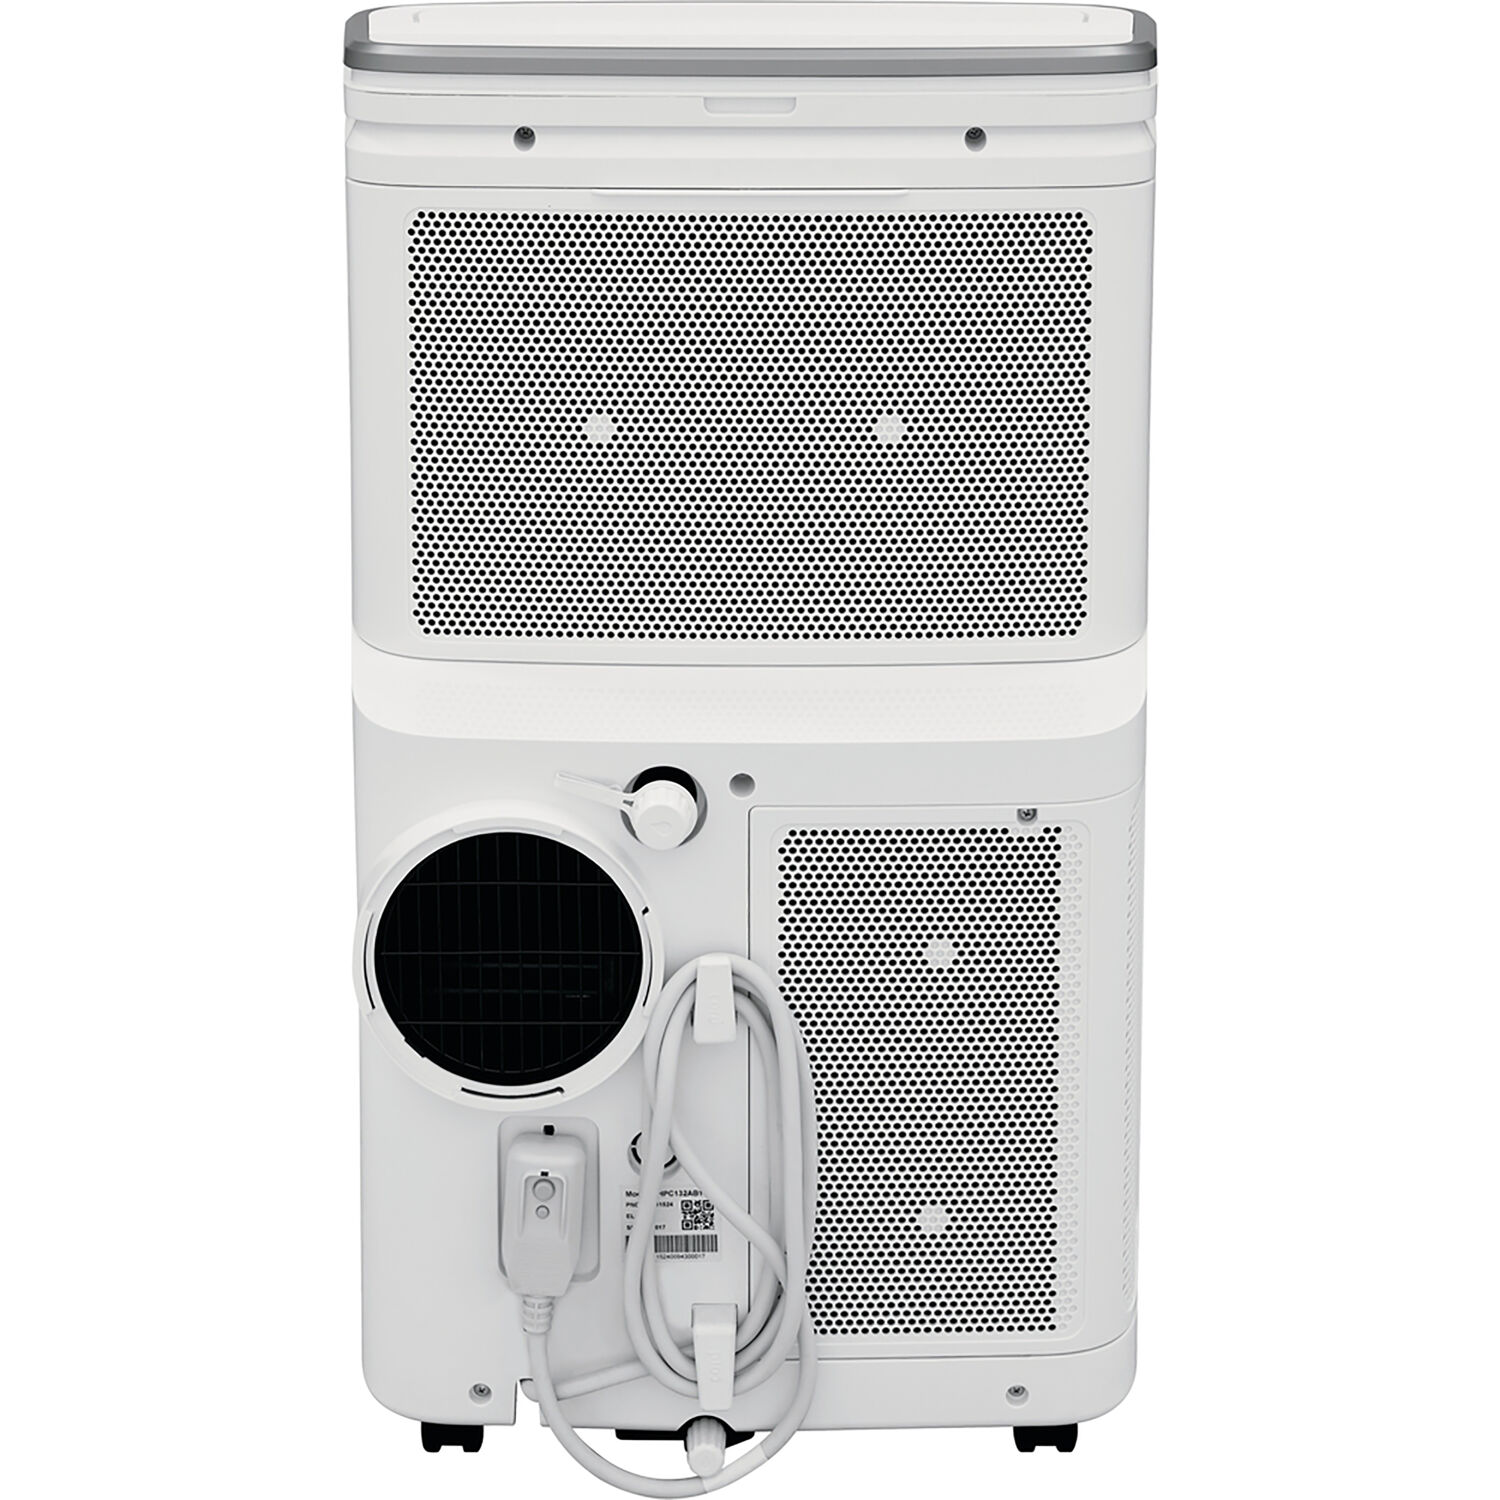 Frigidaire Cool Connect Smart Portable Air Conditioner with Wi-Fi Control for a Room up to 600-Sq. Ft. - image 8 of 14